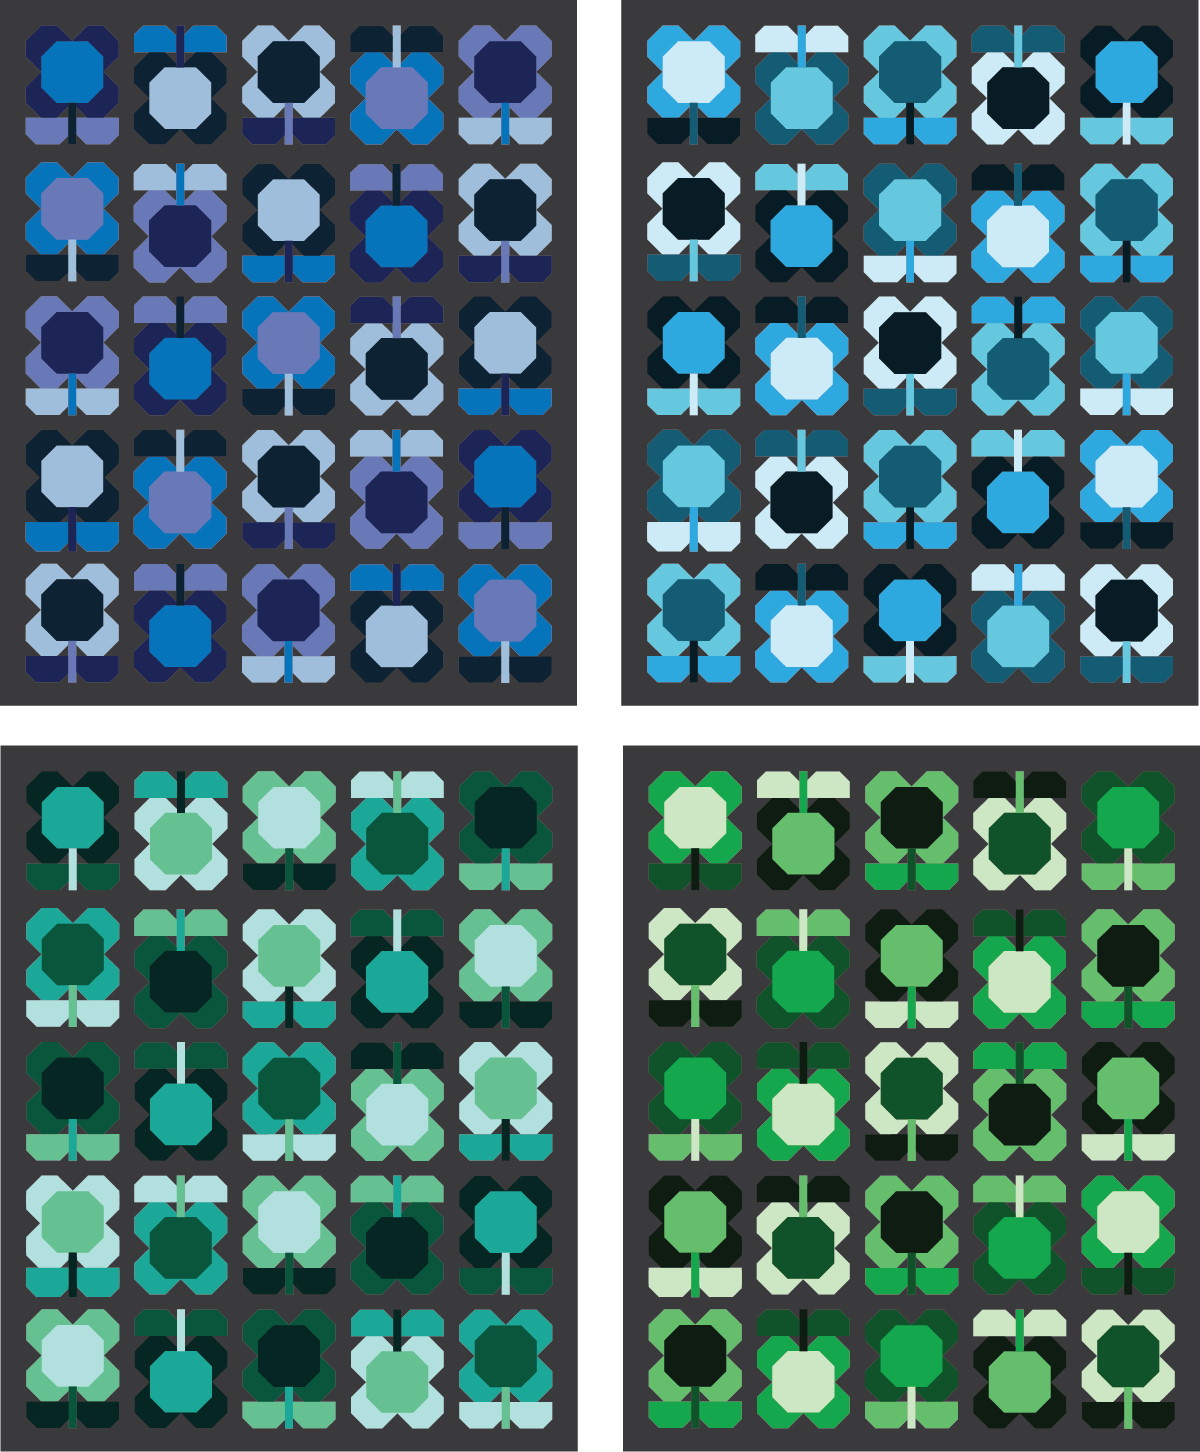 Folk Blooms Quilt in cool colors - Sewfinity.com